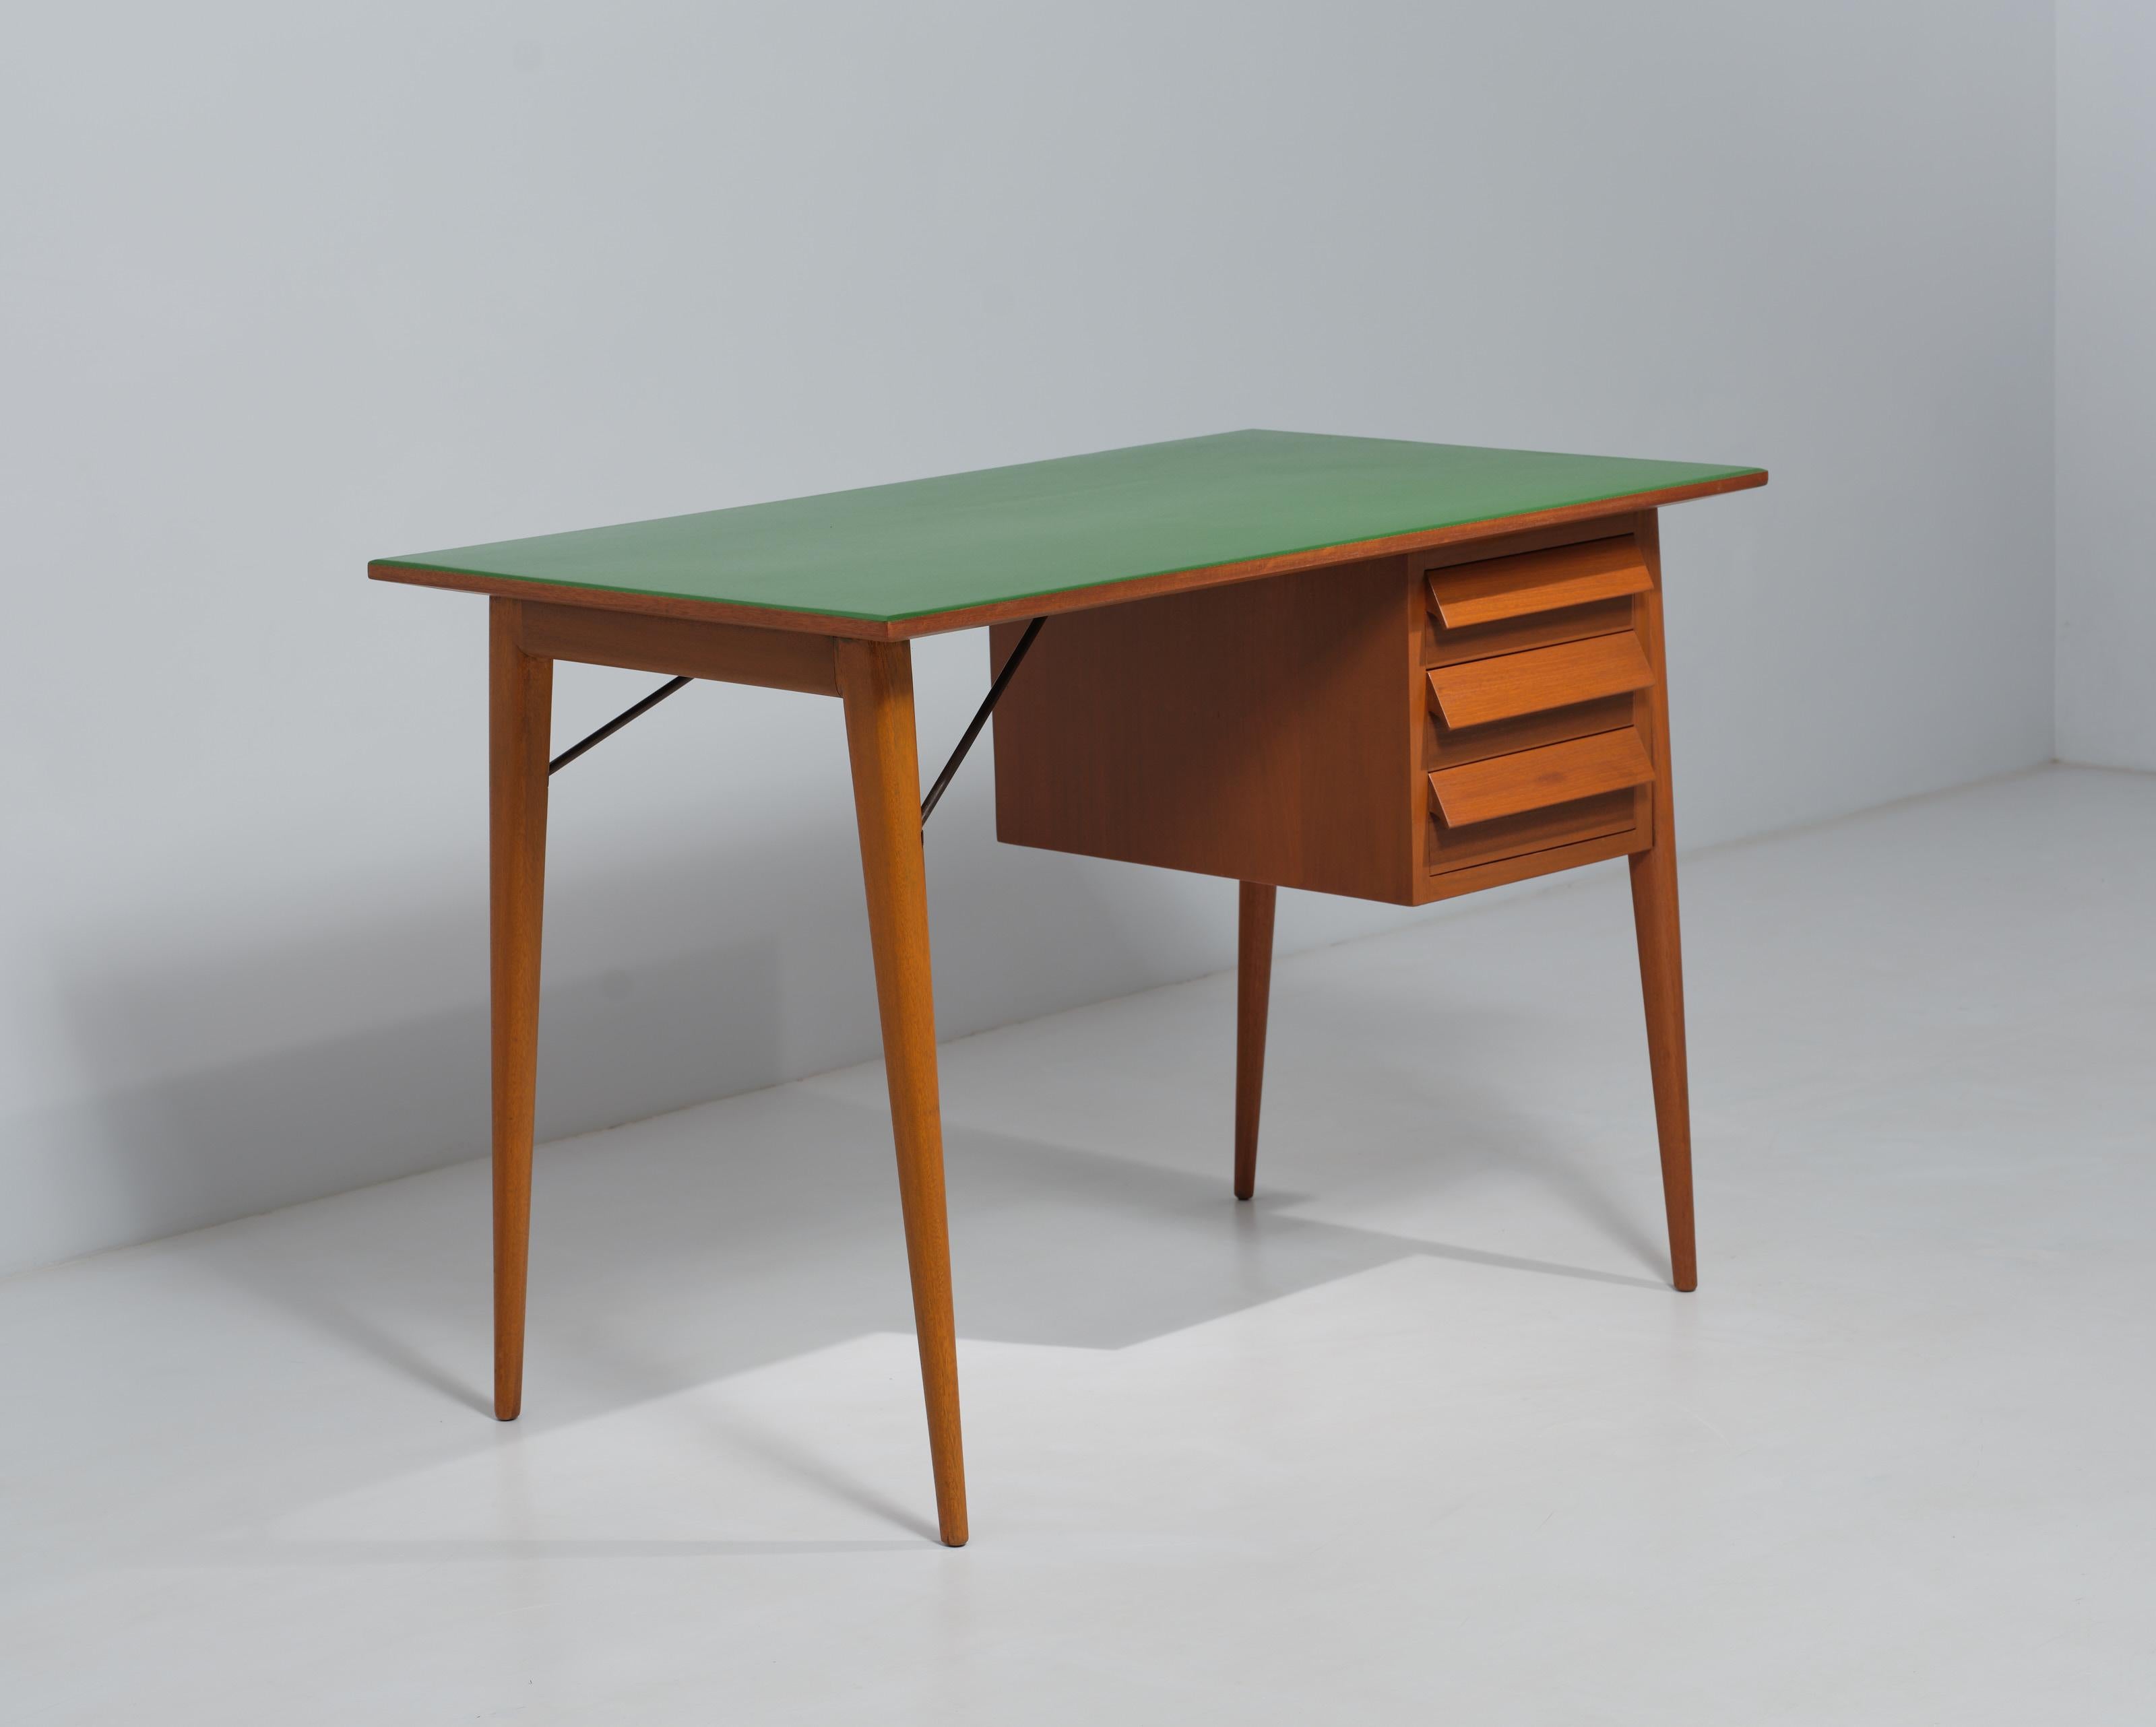 Mid-20th Century Mid-Century Modern Teak Desk with Green Lacquer and Meticulous Restoration